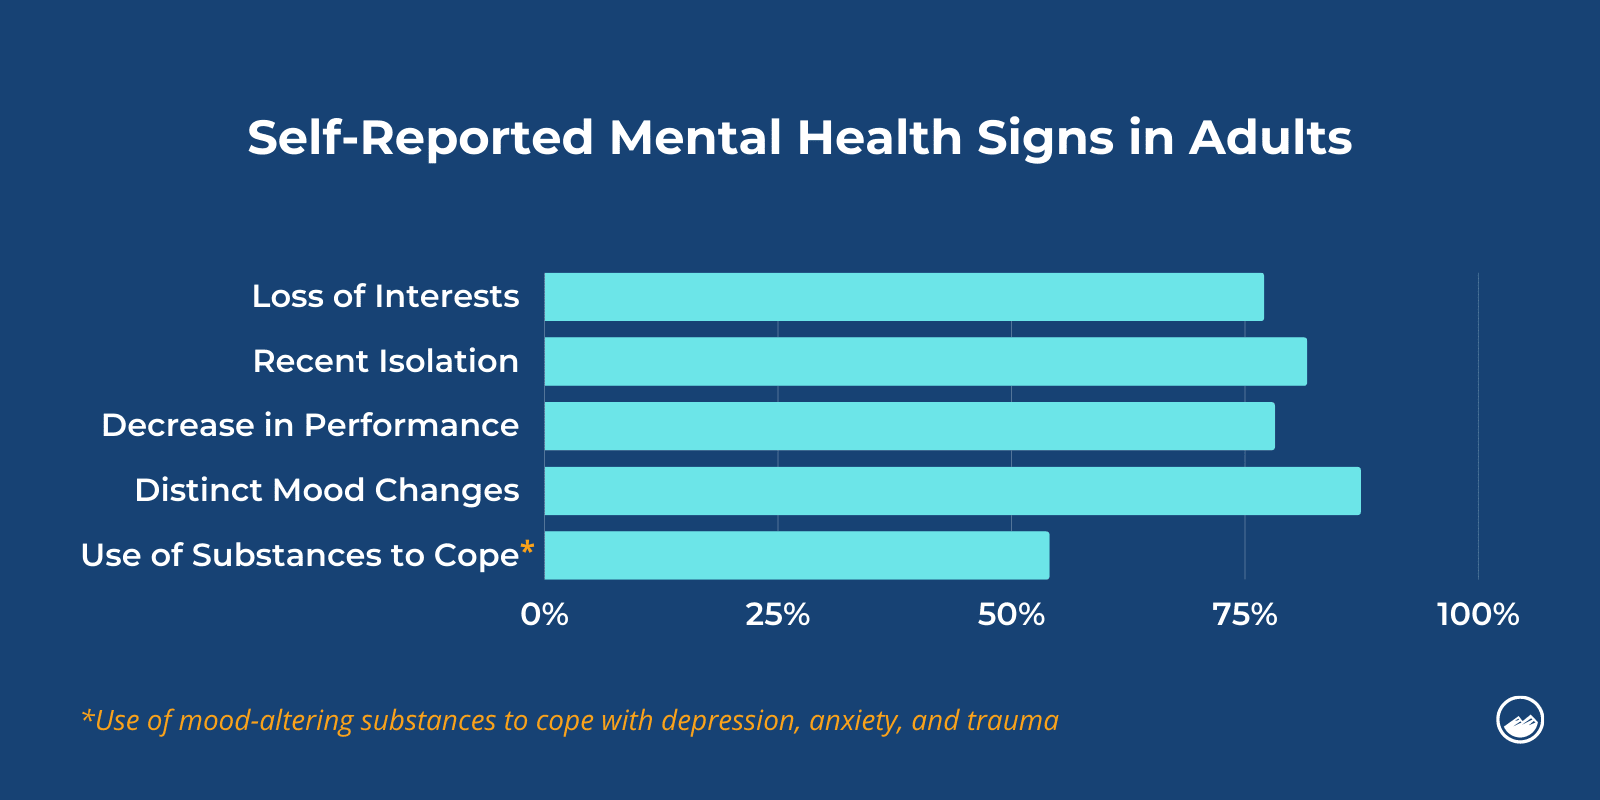 Self-Reported Mental Health Signs in Adults